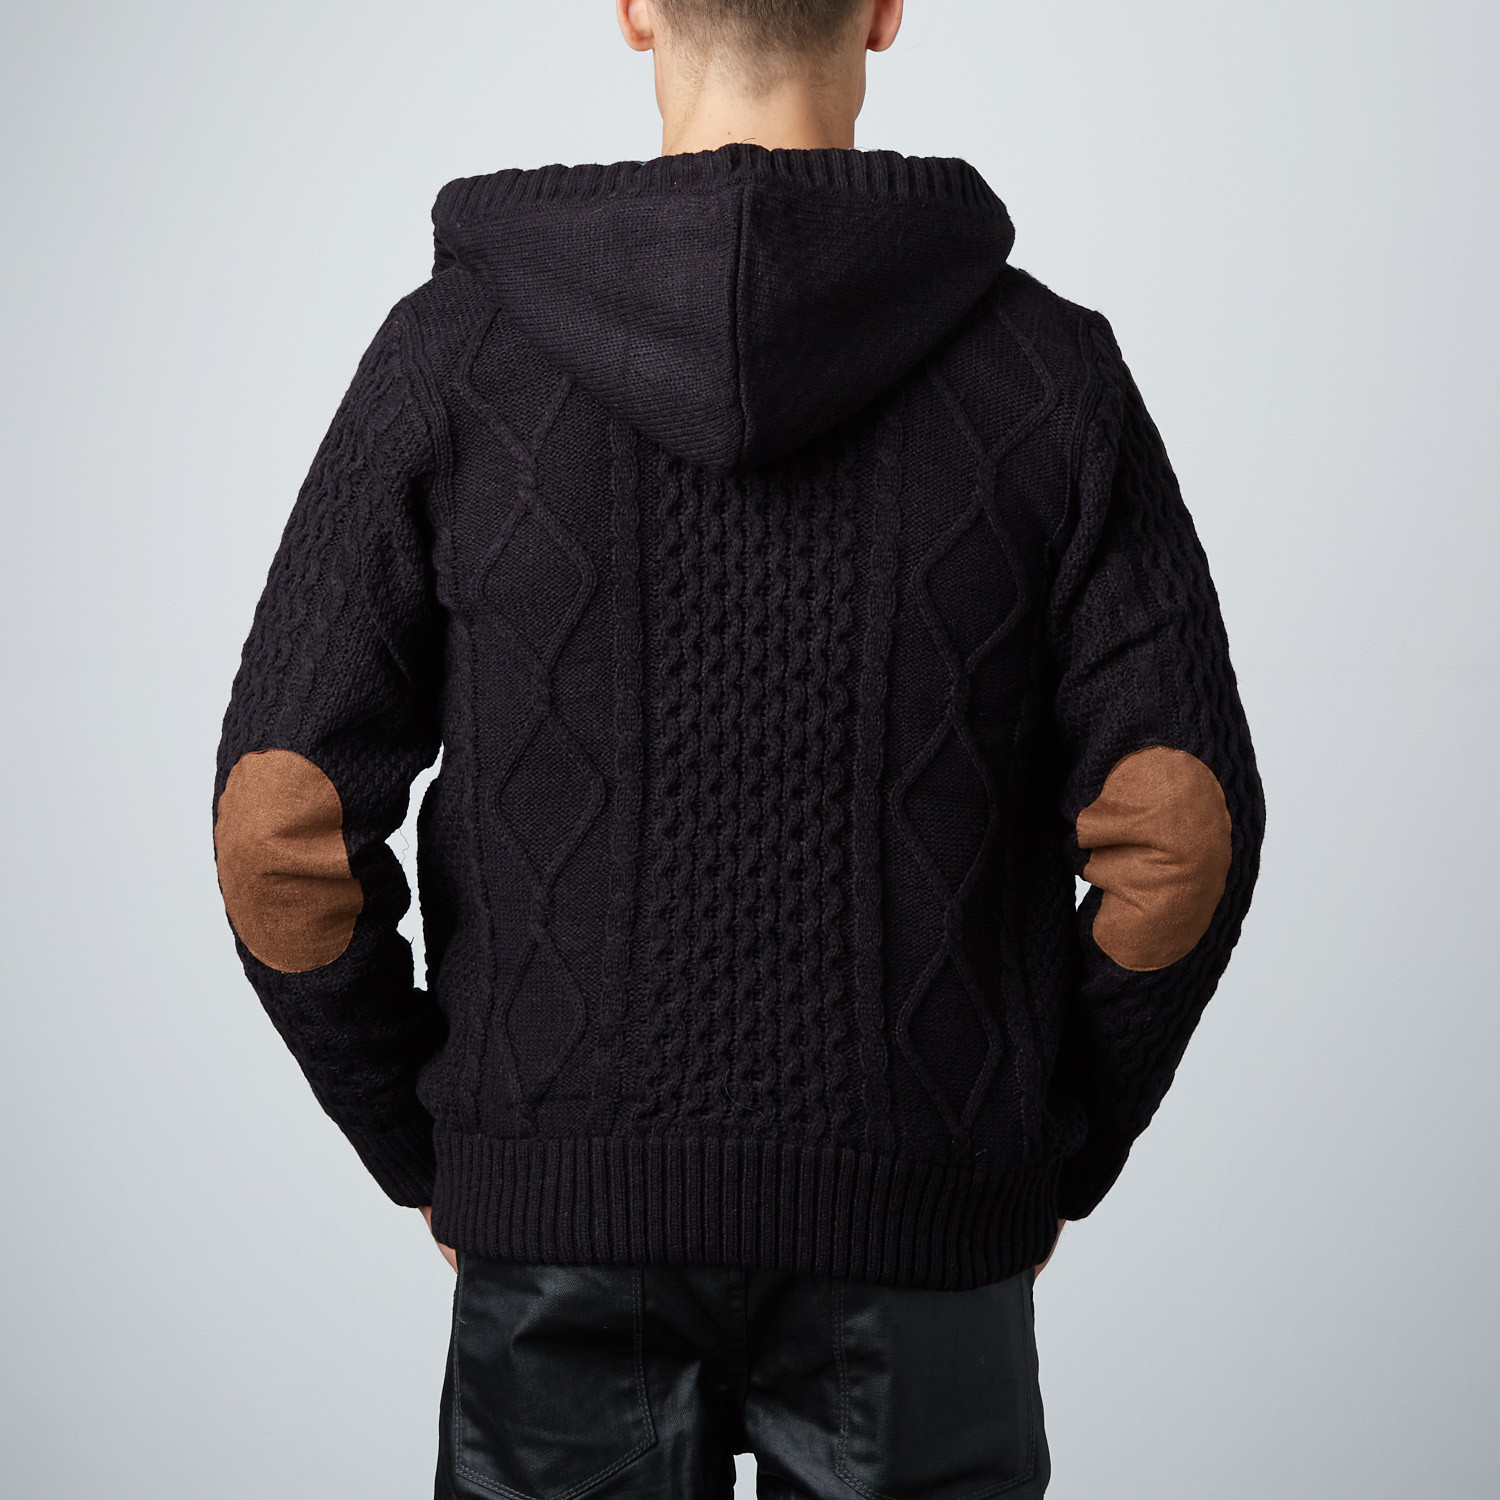 Button-Up Waffle Knit Hoodie // Black (S) - American Stitch